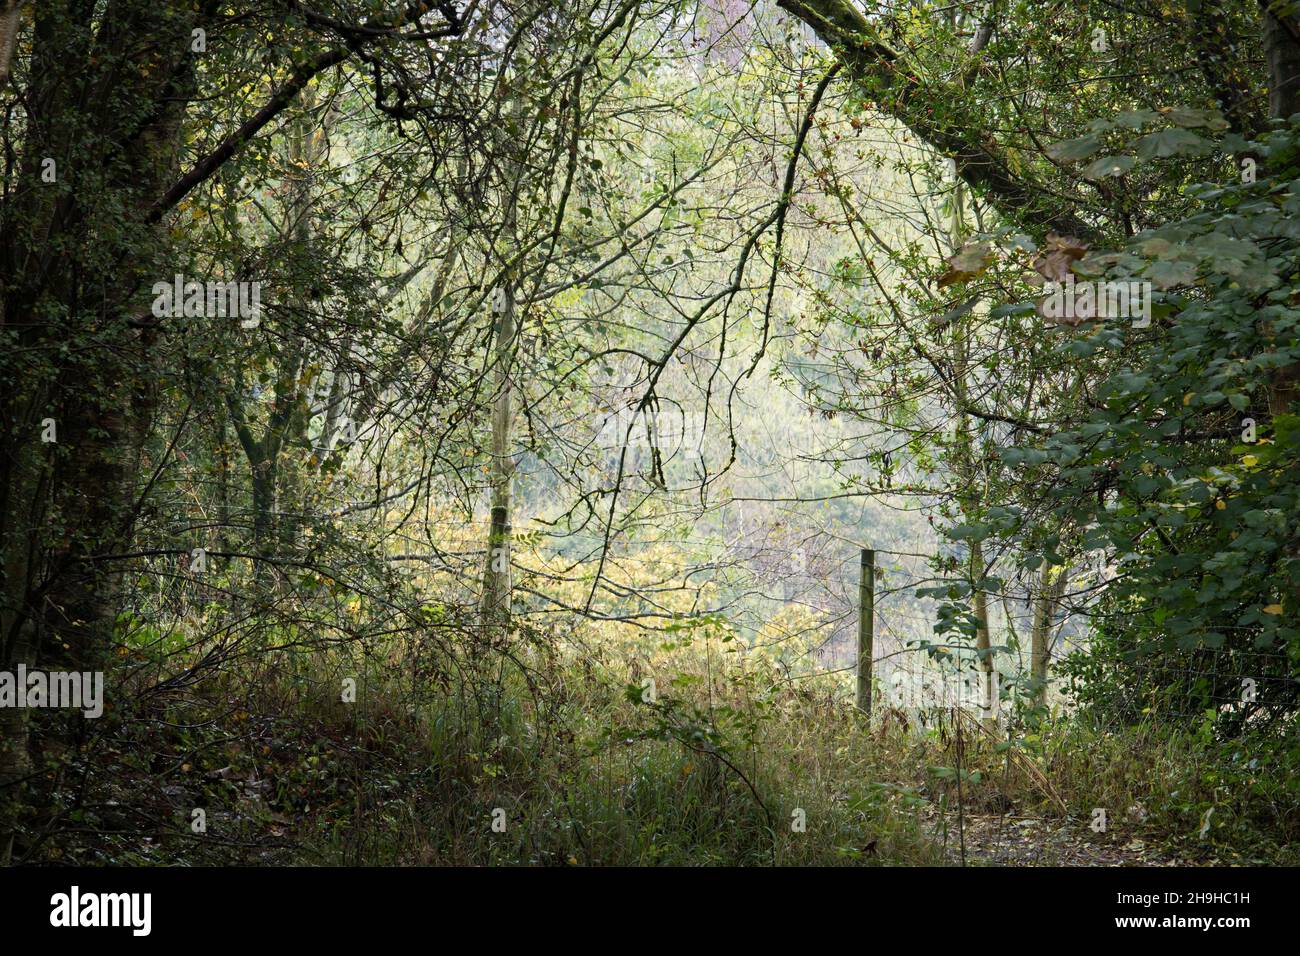 No way through to the distant hazy landscape, in a dense woodland surrounded by a wire fence Stock Photo